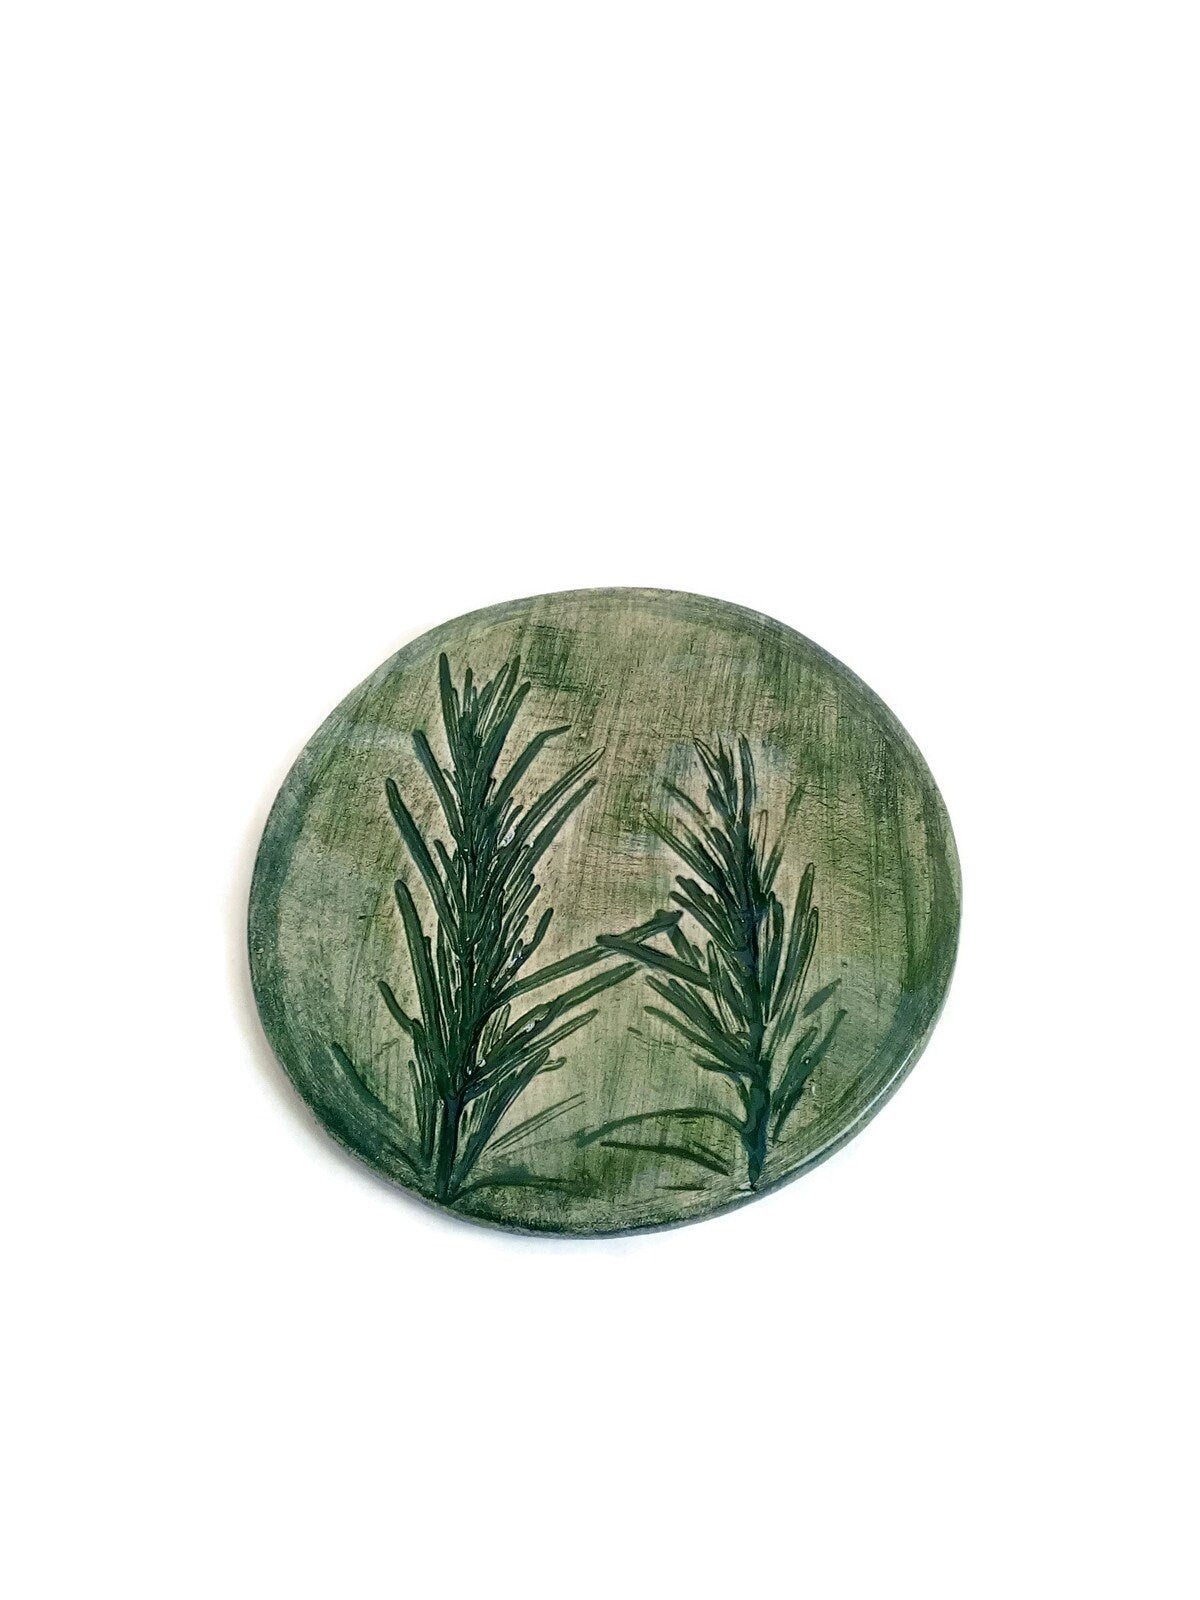 1Pc Handmade Ceramic Rustic Coasters Tile With Cork Back, Mothers Day Gift Idea, Botanical Round Coasters For Plant Lovers Artisan Pottery - Ceramica Ana Rafael